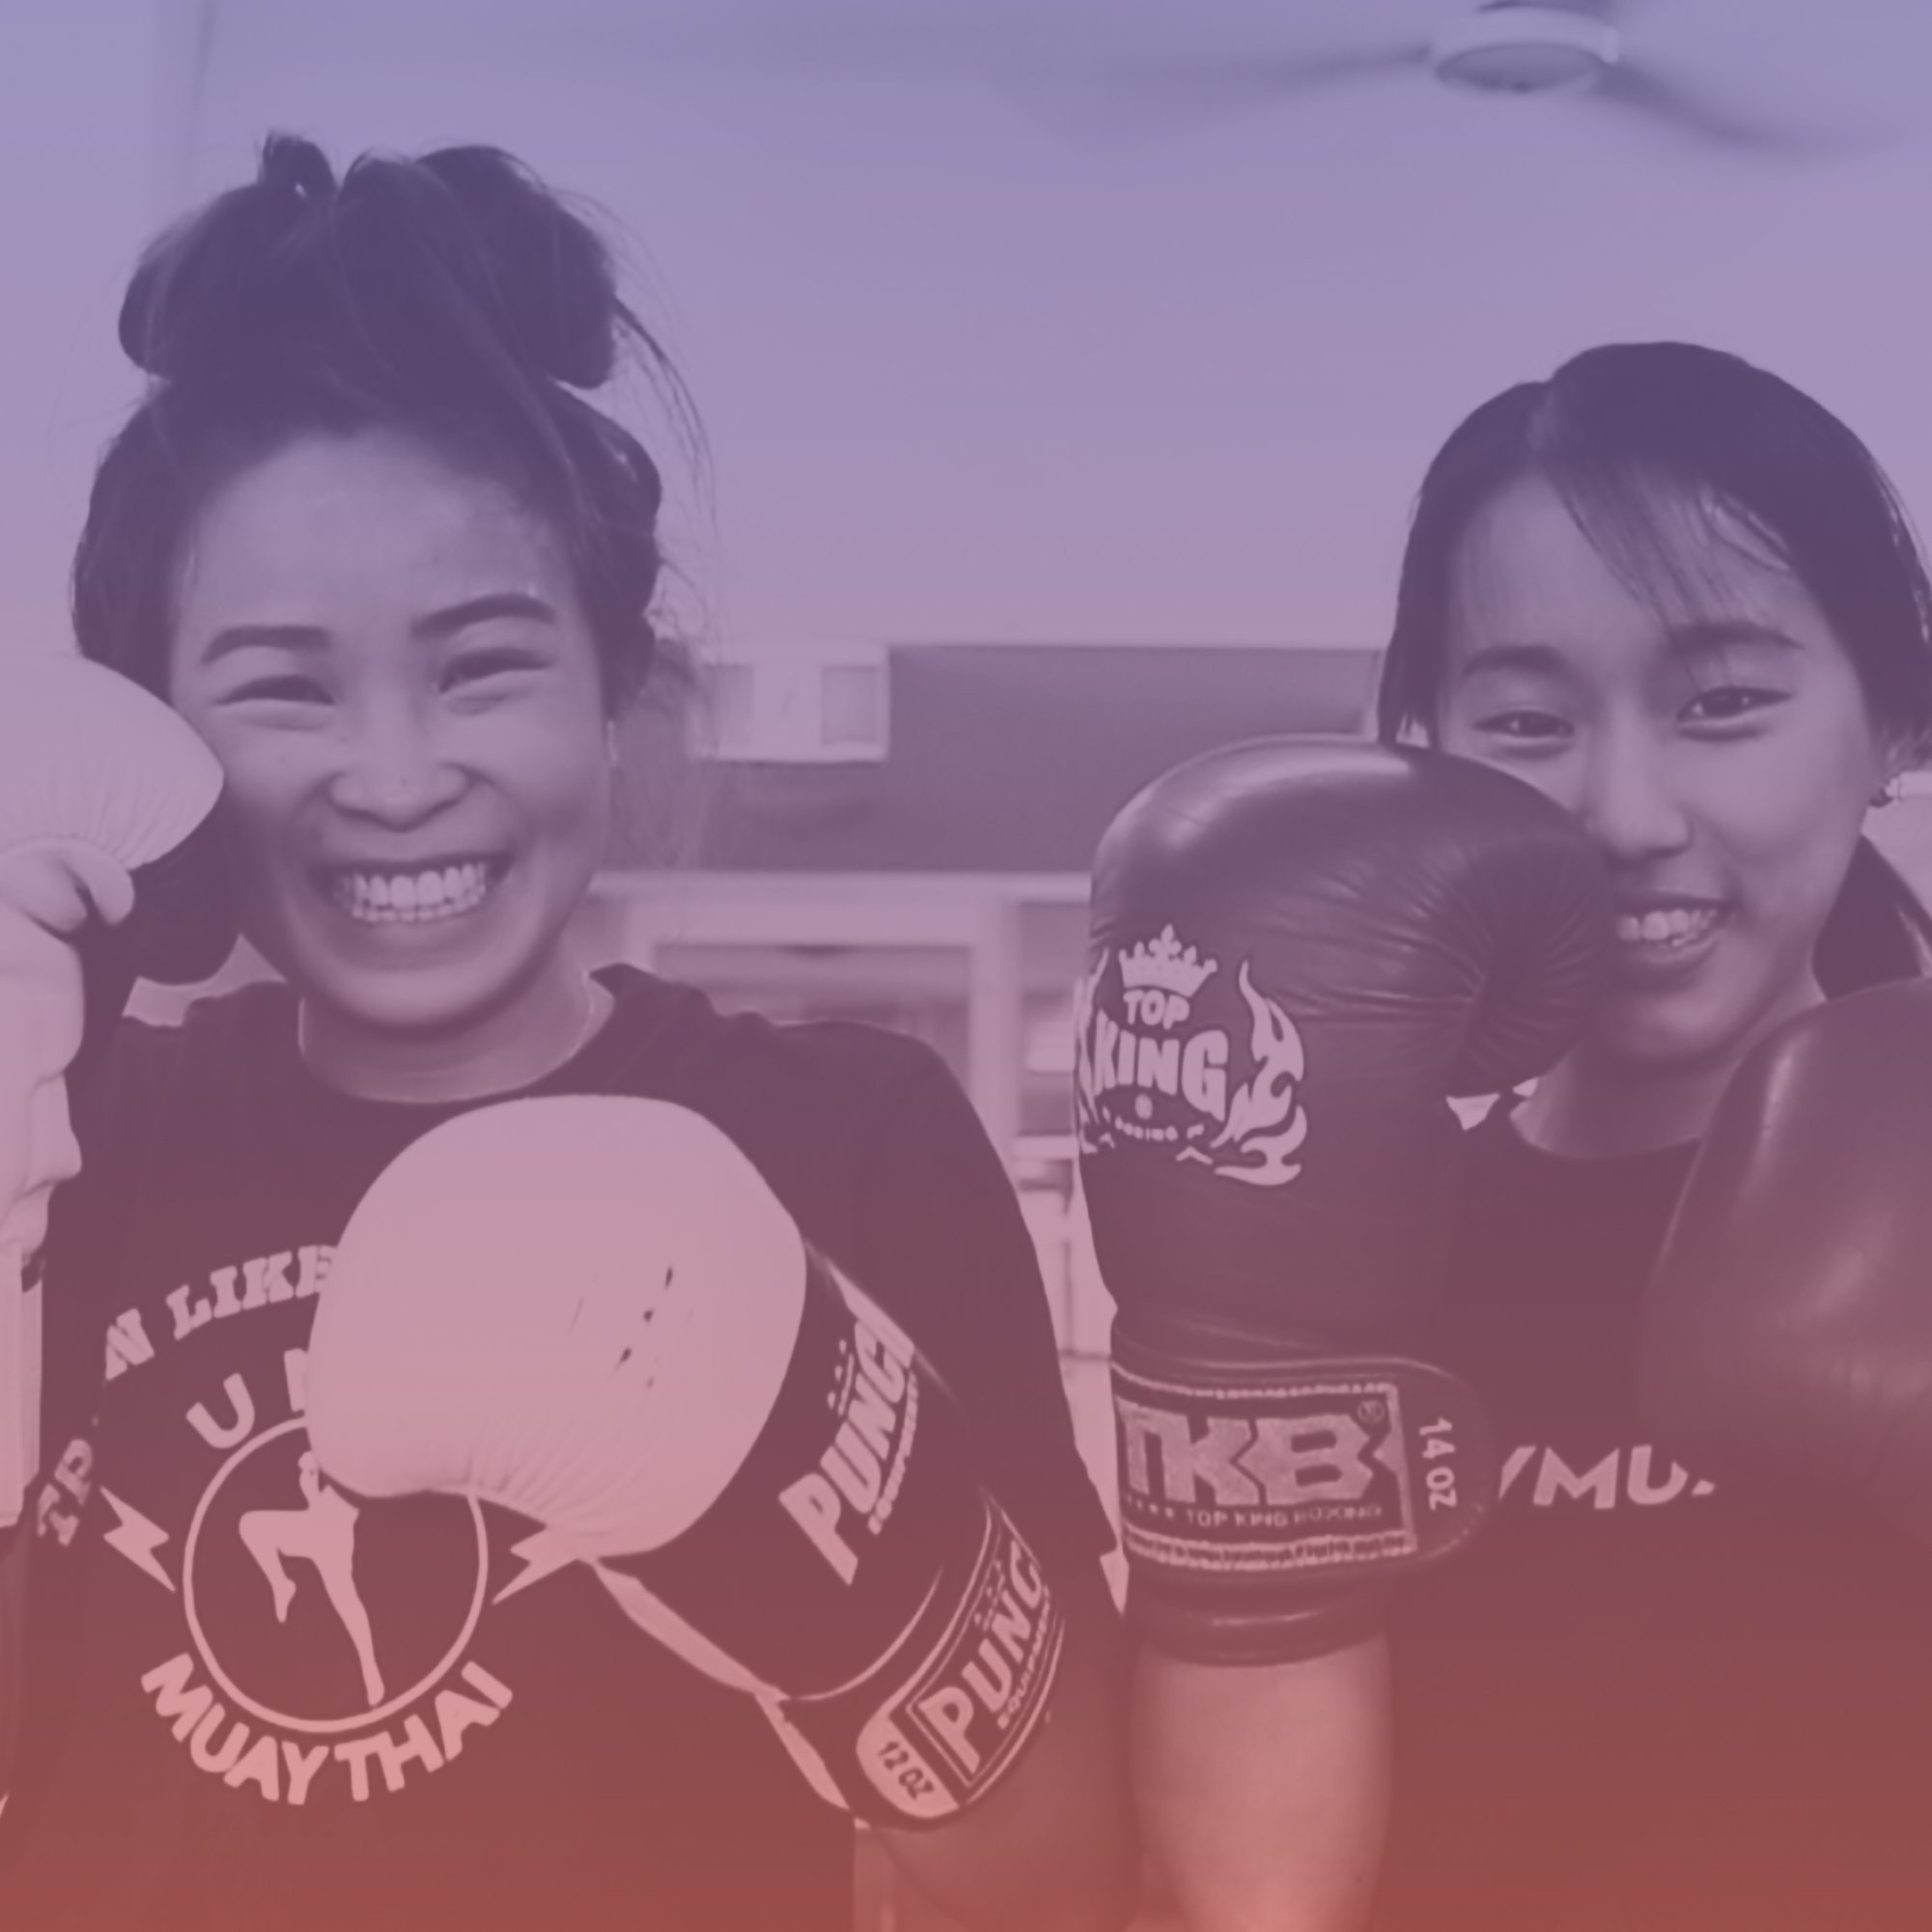 Women smiling with boxing gloves